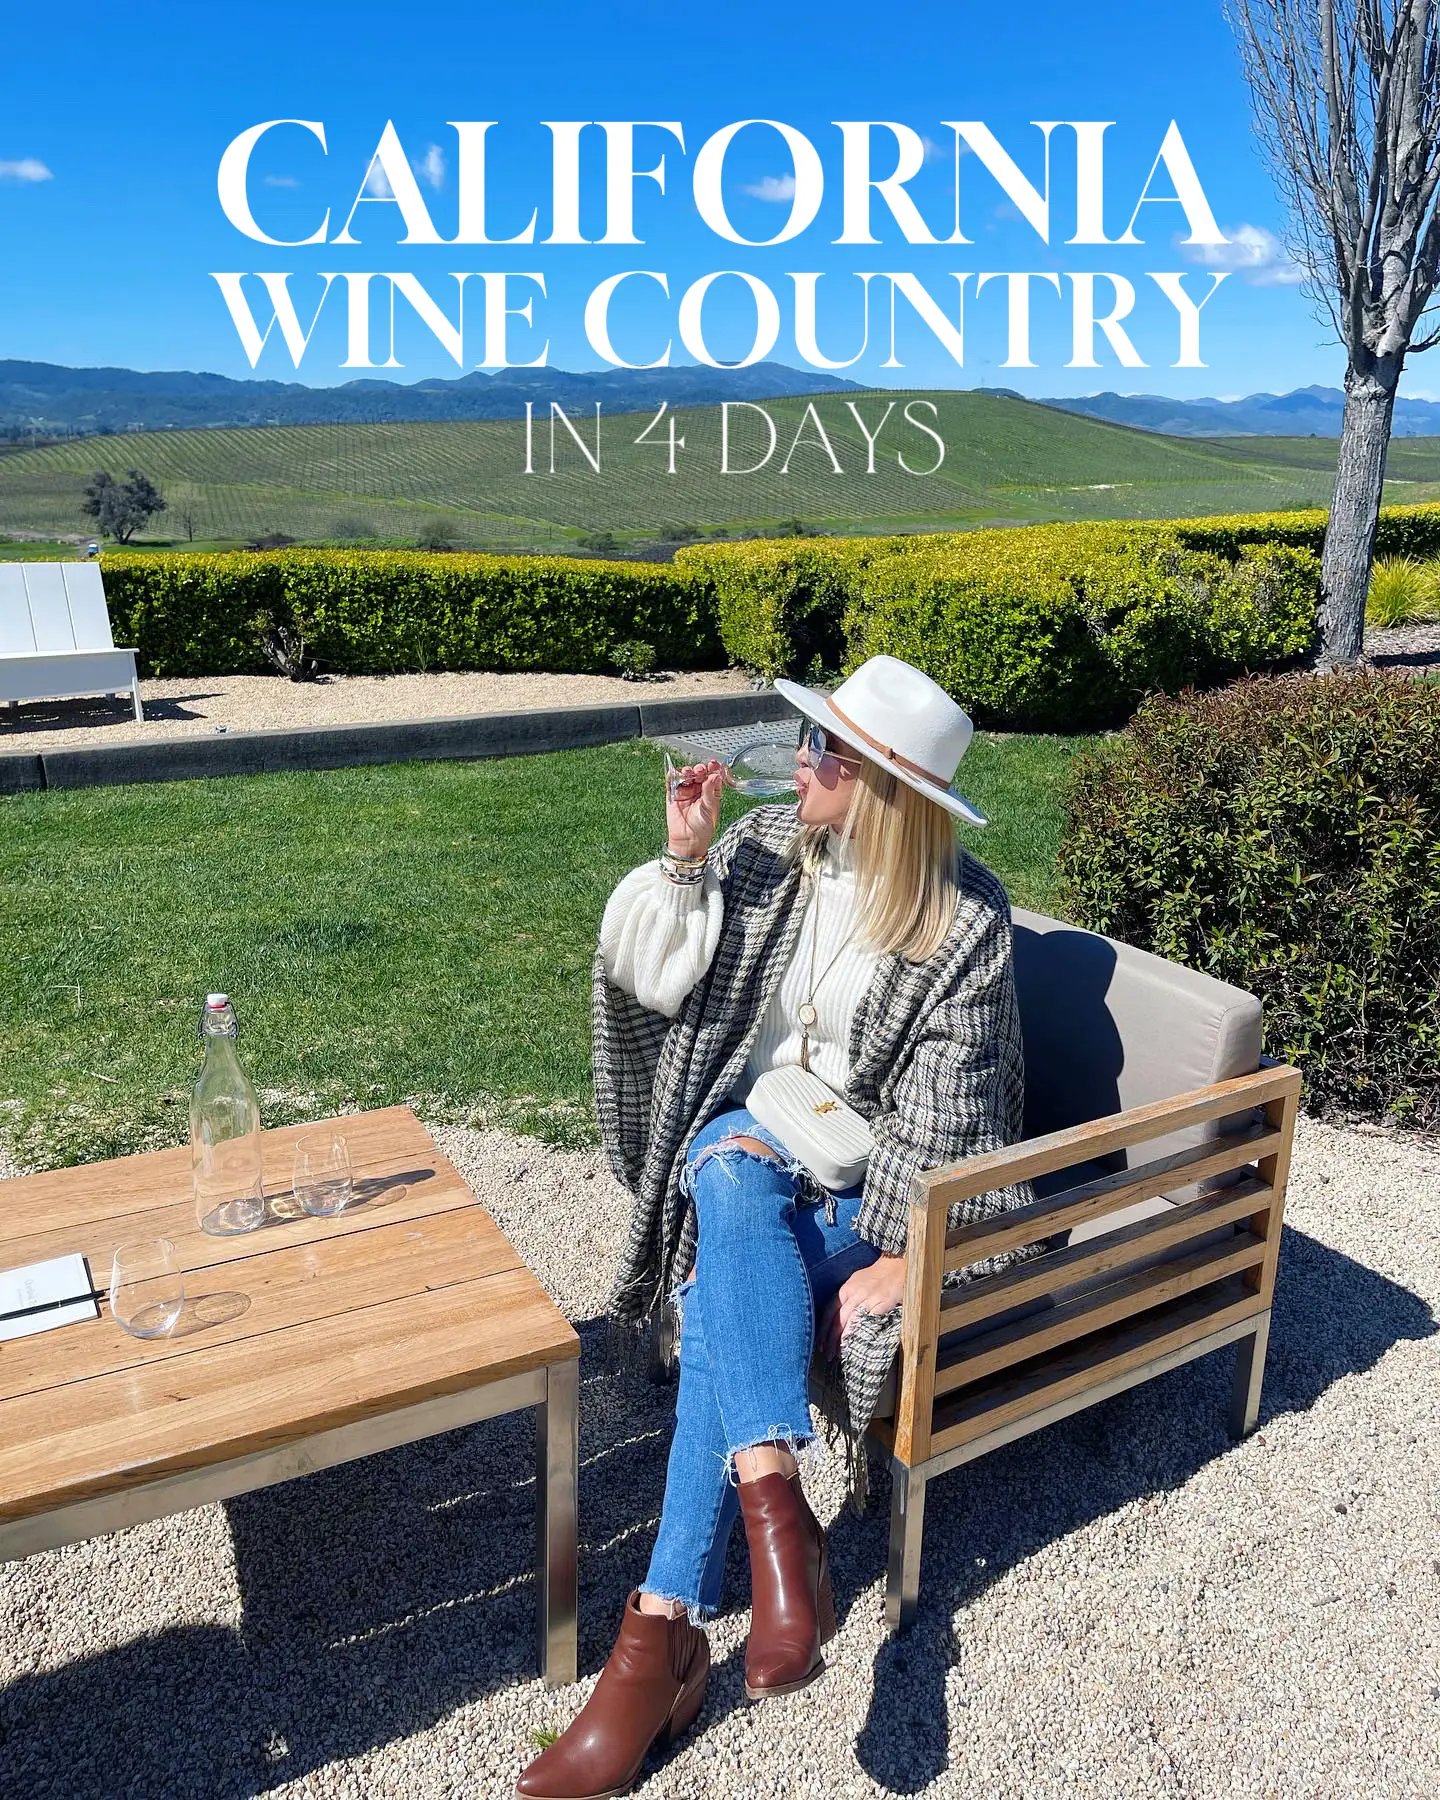 The Wine Country Hats - The Wine Country